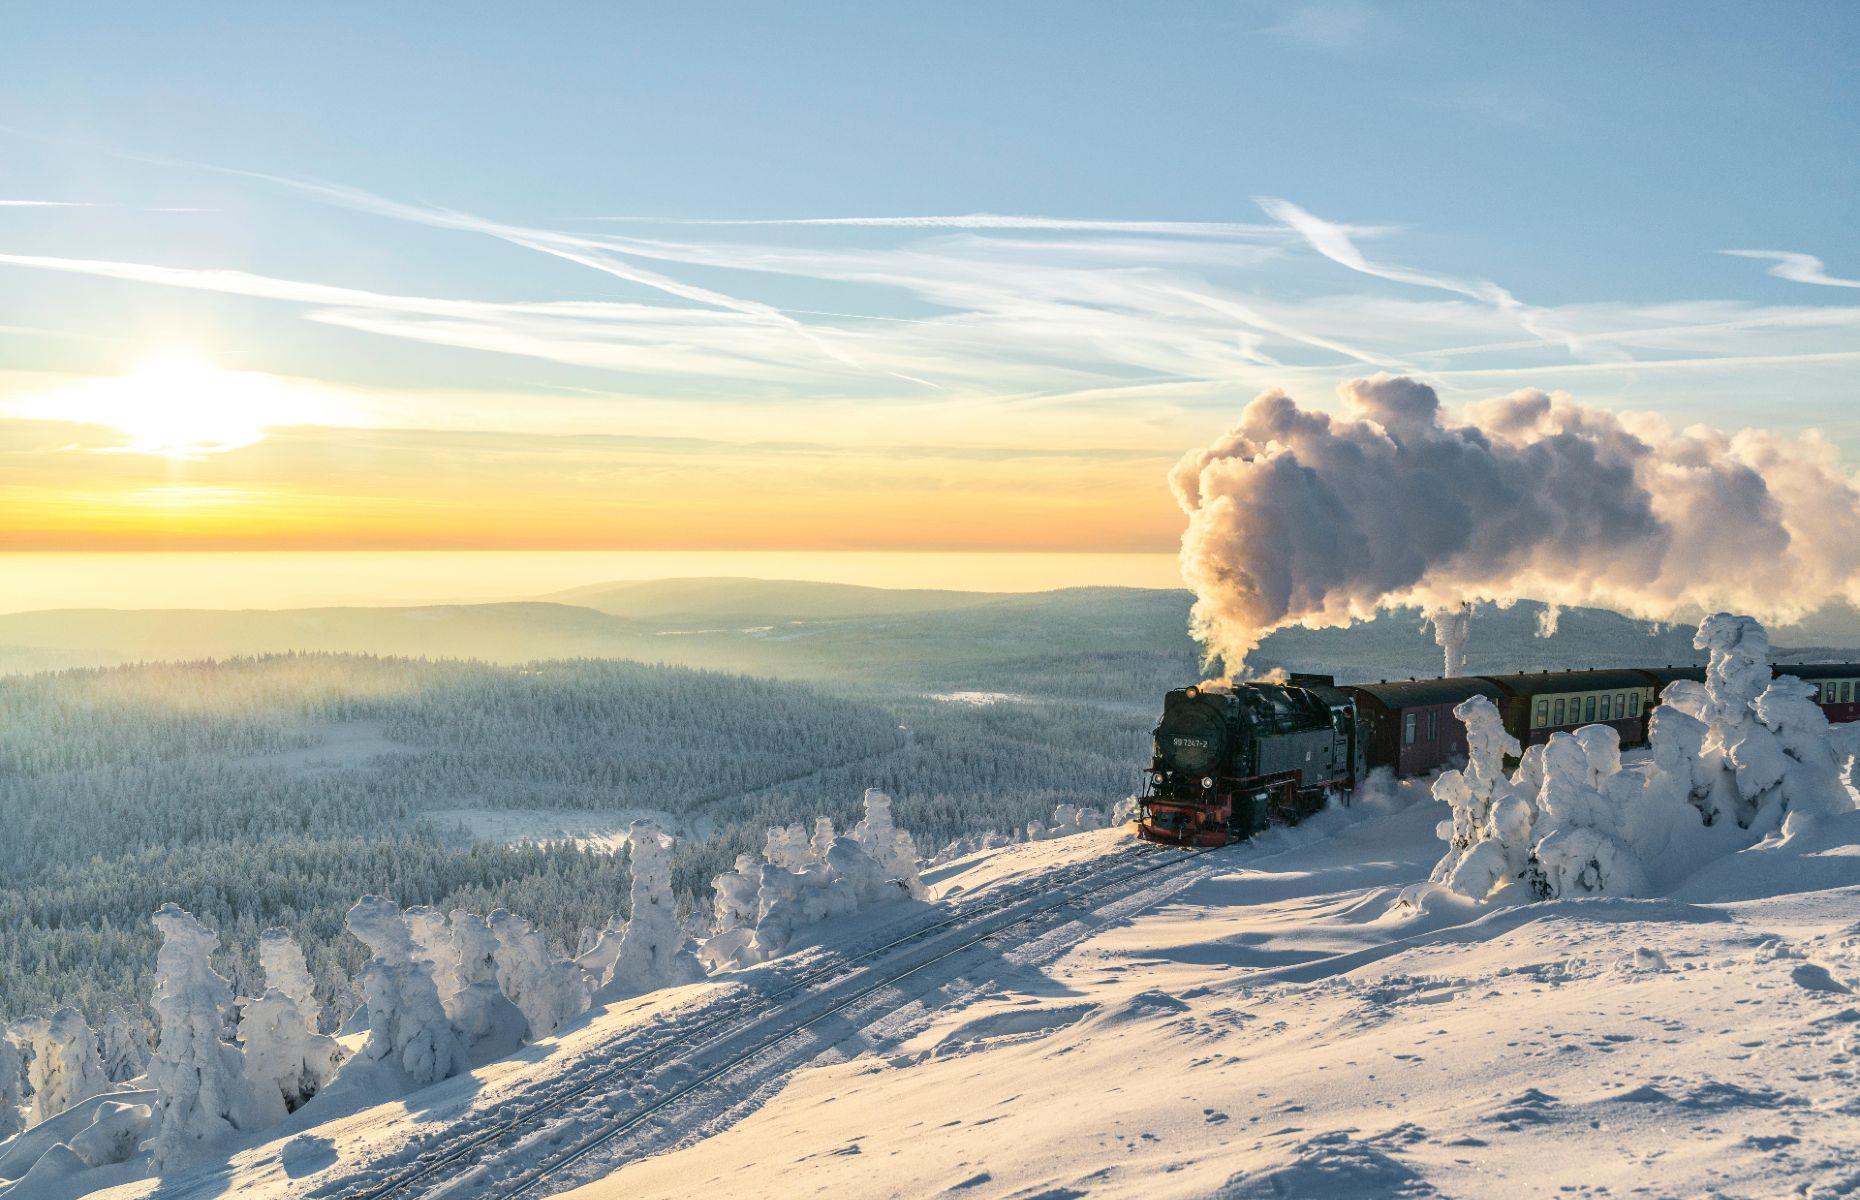 <p>Named after the 3,747-foot (1,142m) mountain which it traverses, central Germany’s <a href="https://www.hsb-wr.de/">Brocken Railway</a> is all sweeping panoramas and serpentine bends. This 11-mile (19km) branch of track, connecting the mountain to the Harz railway, is still operated by historic steam locomotives, since this part of Germany was behind the Iron Curtain for decades and its trains were never modernized. But that’s good news for rail buffs, who come here to experience the decades-old carriages in all their glory.</p>